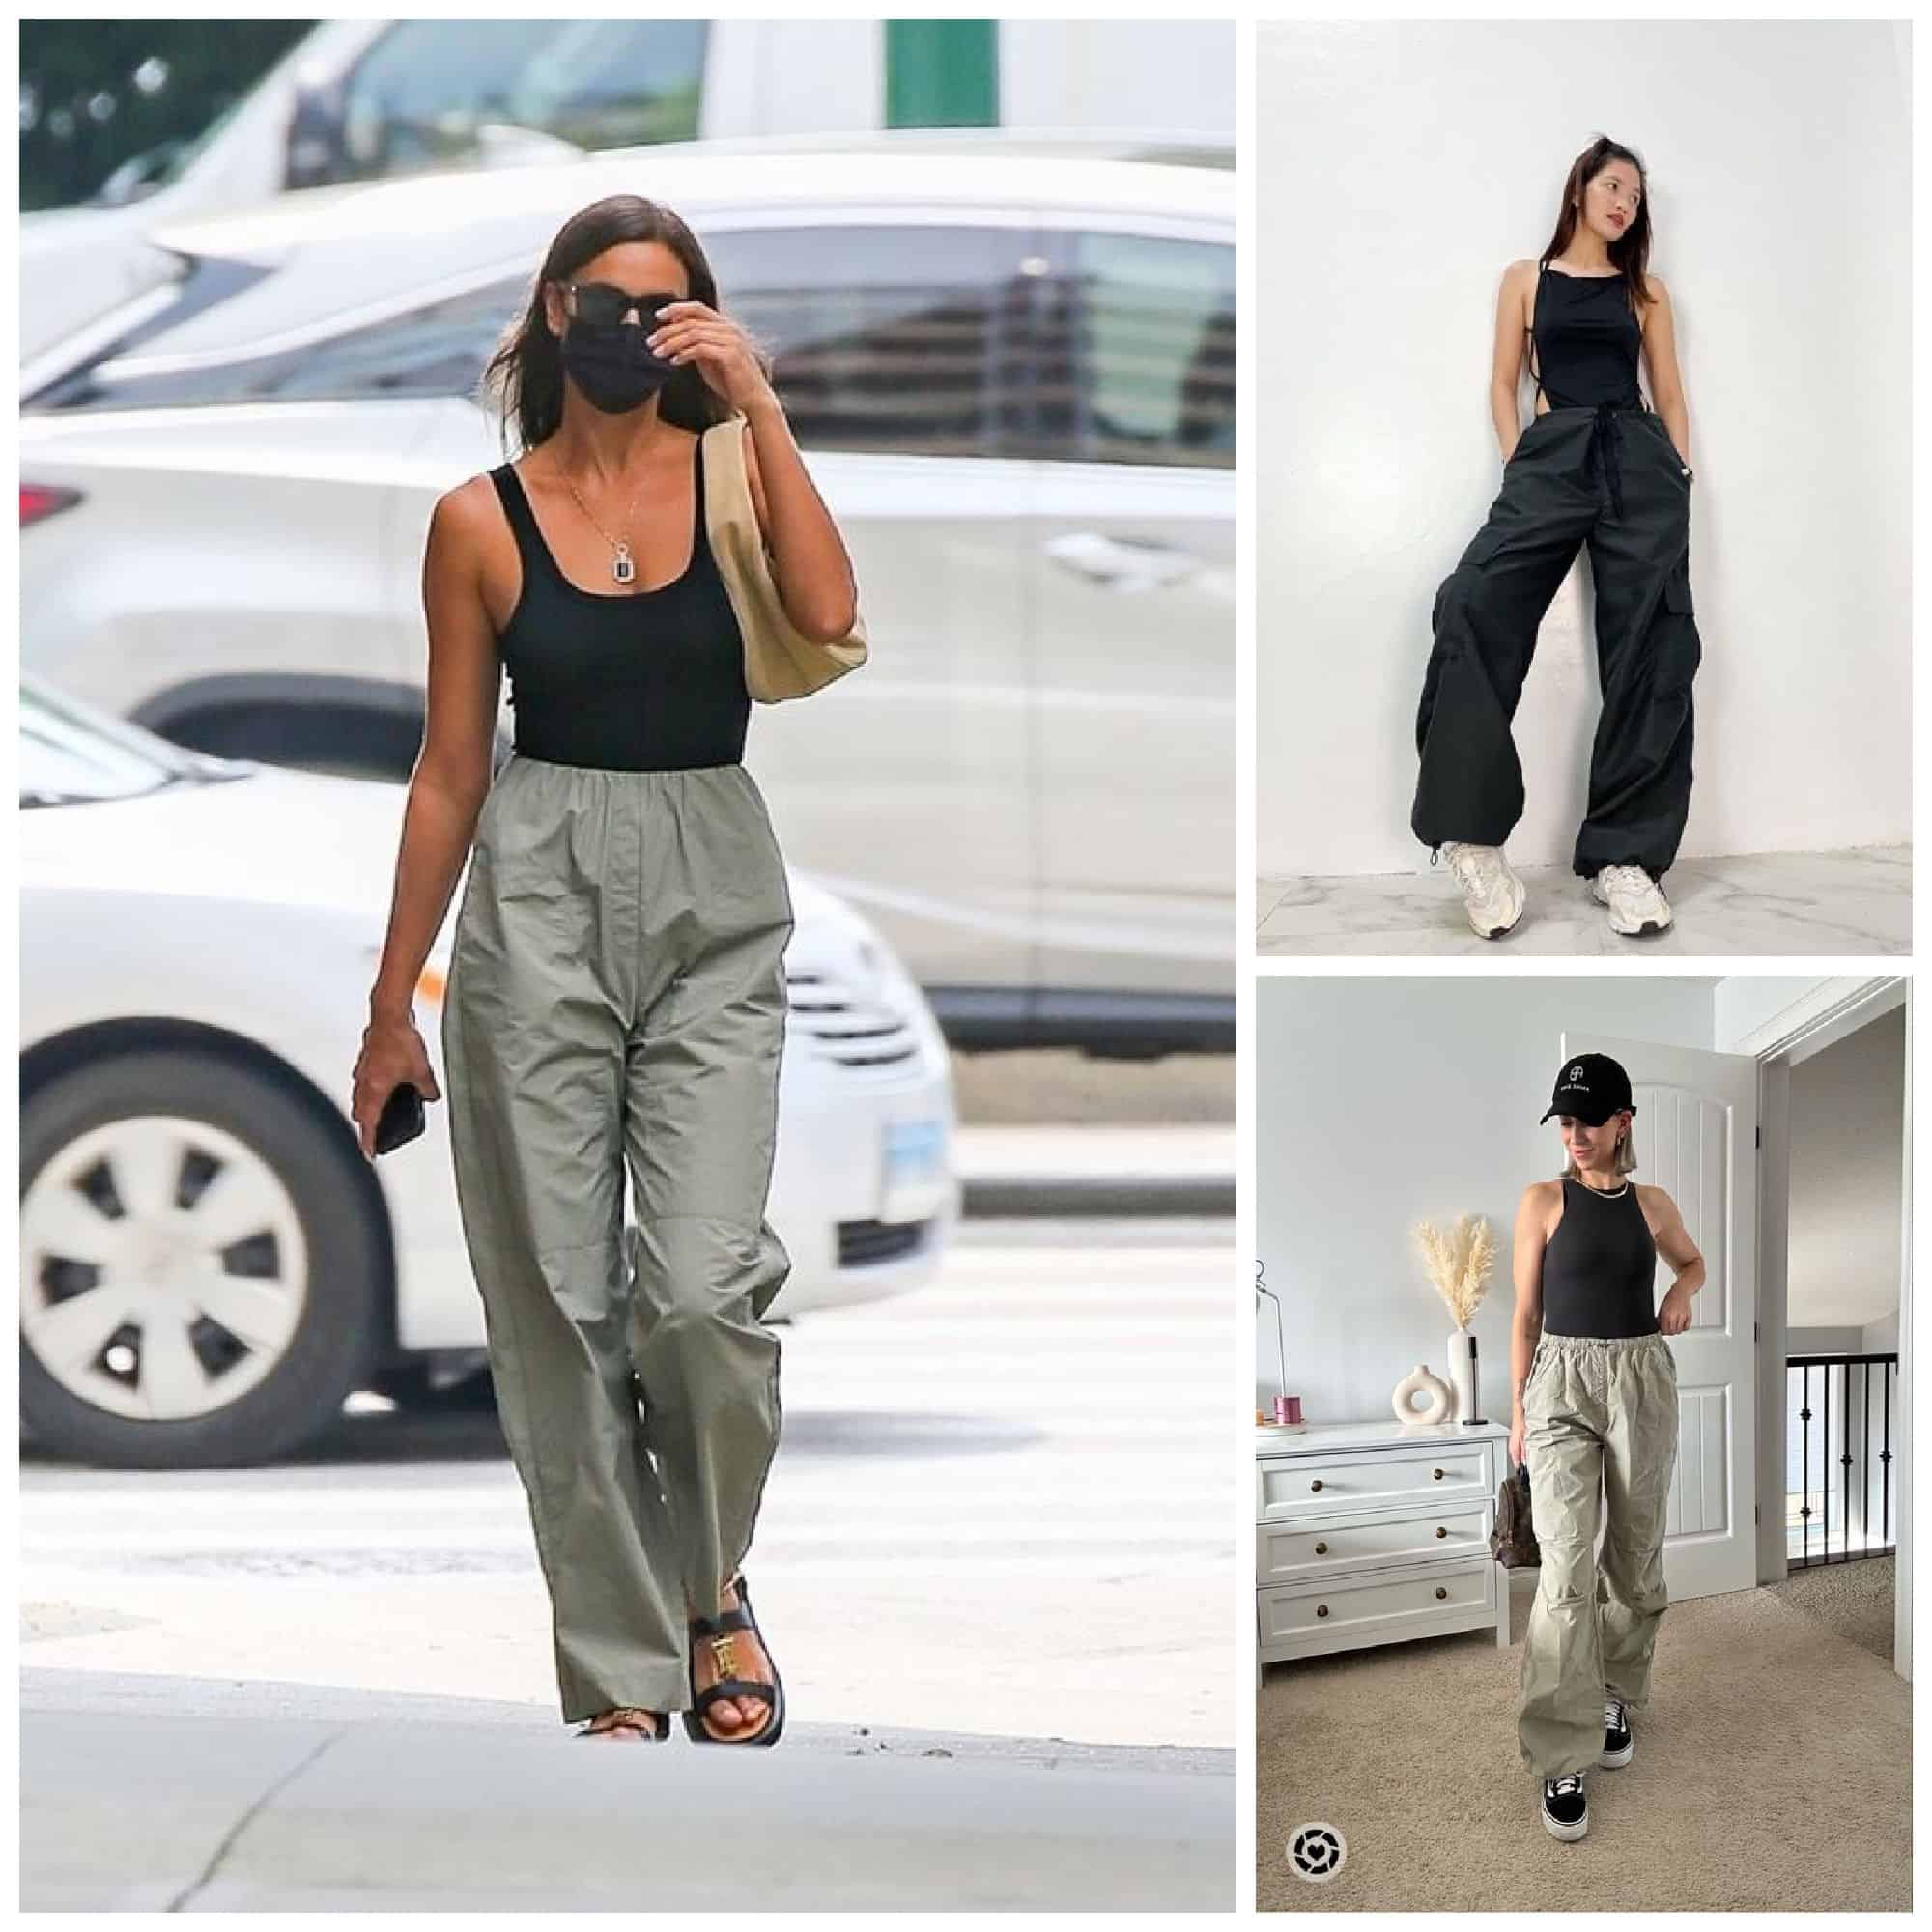 HIMIWAY Cargo Pants Women Palazzo Pants for Women Women's Fashion Casual  Solid Color Washed Denim Multi-Pocket Overalls Pants Army Green C M -  Walmart.com